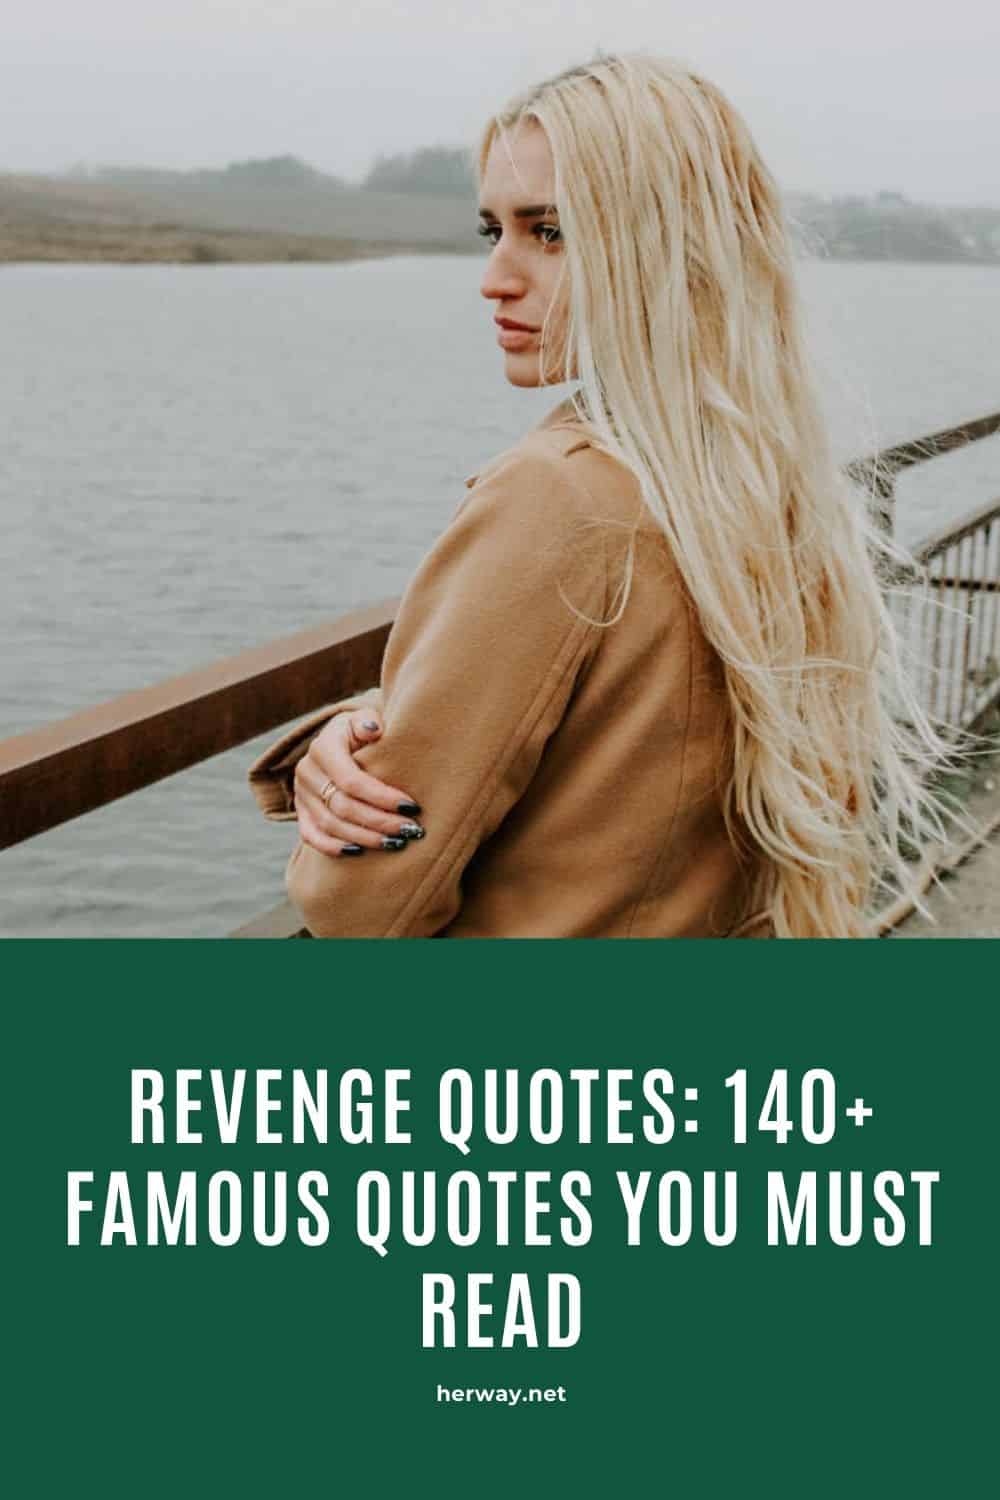 Revenge Quotes: 140+ Famous Quotes You Must Read